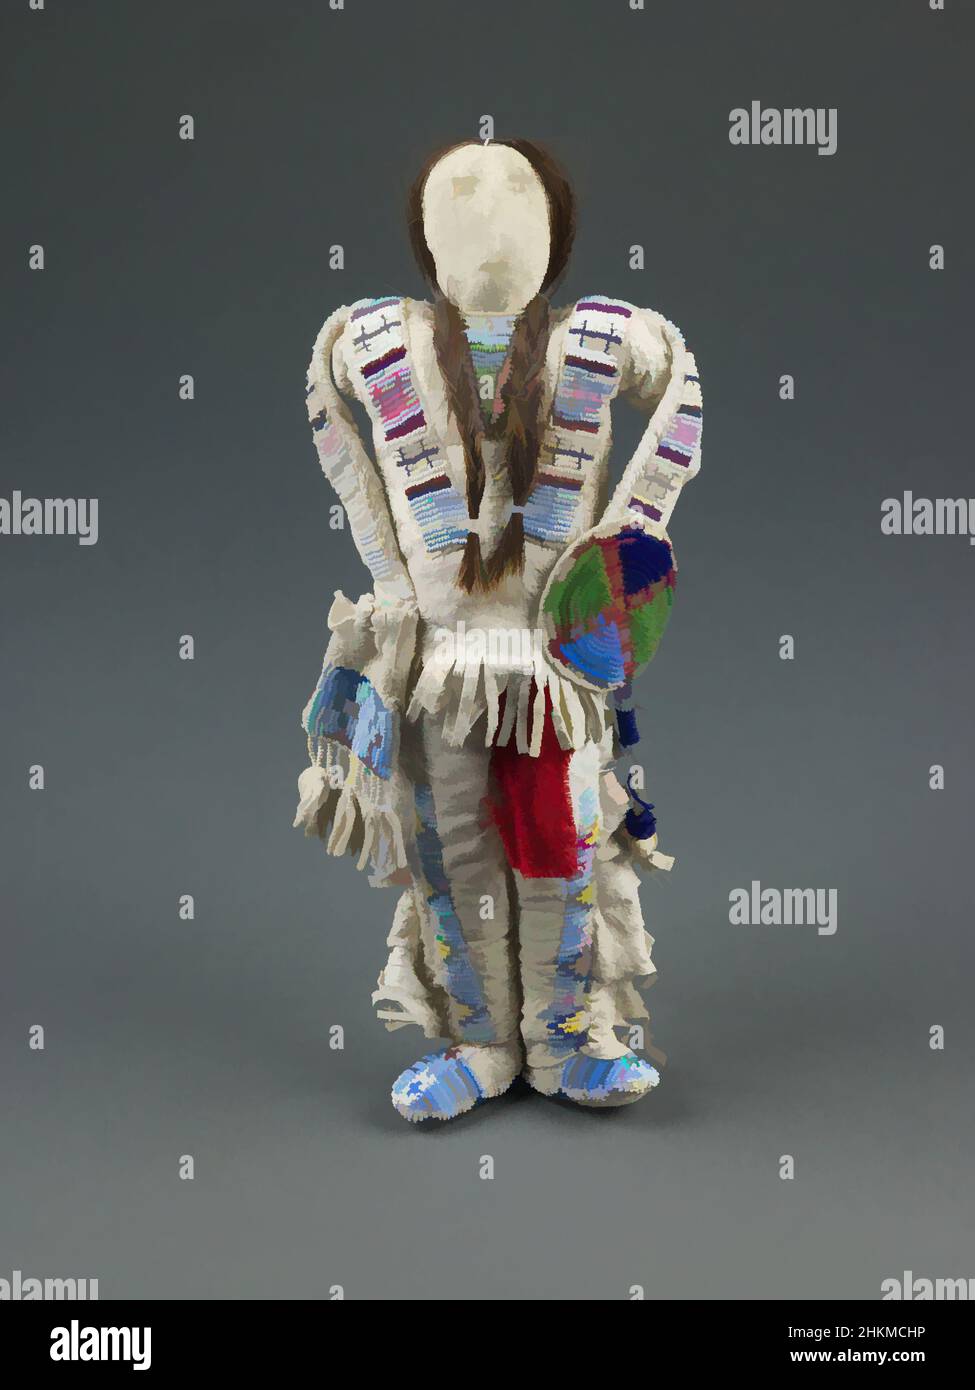 Art inspired by Male Doll, Sioux, Lakota (Sioux), or Hinono'ei (Arapaho), c.1890, Tanned hide, glass seed beads, wool cloth, horsehair, and wood bow, Made in United States, North and Central America, Recreational artifacts, 14 × 5 1/4 × 1 3/4 in. (35.6 × 13.3 × 4.4 cm, Classic works modernized by Artotop with a splash of modernity. Shapes, color and value, eye-catching visual impact on art. Emotions through freedom of artworks in a contemporary way. A timeless message pursuing a wildly creative new direction. Artists turning to the digital medium and creating the Artotop NFT Stock Photo